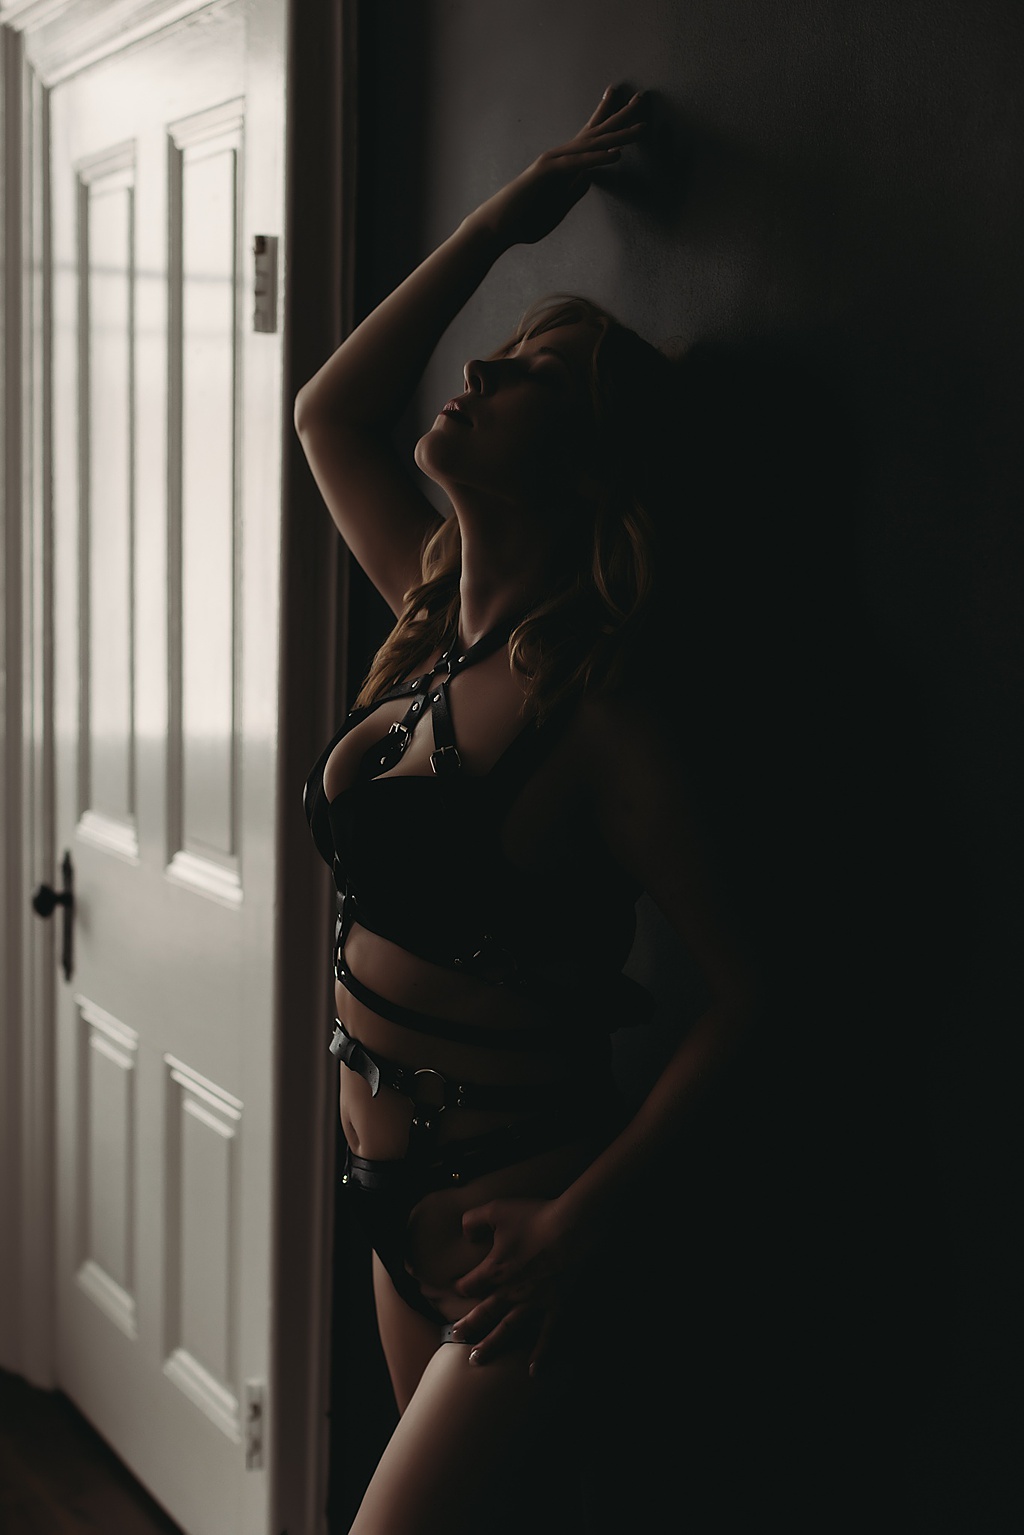 woman leaning against the wall wearing black lingerie